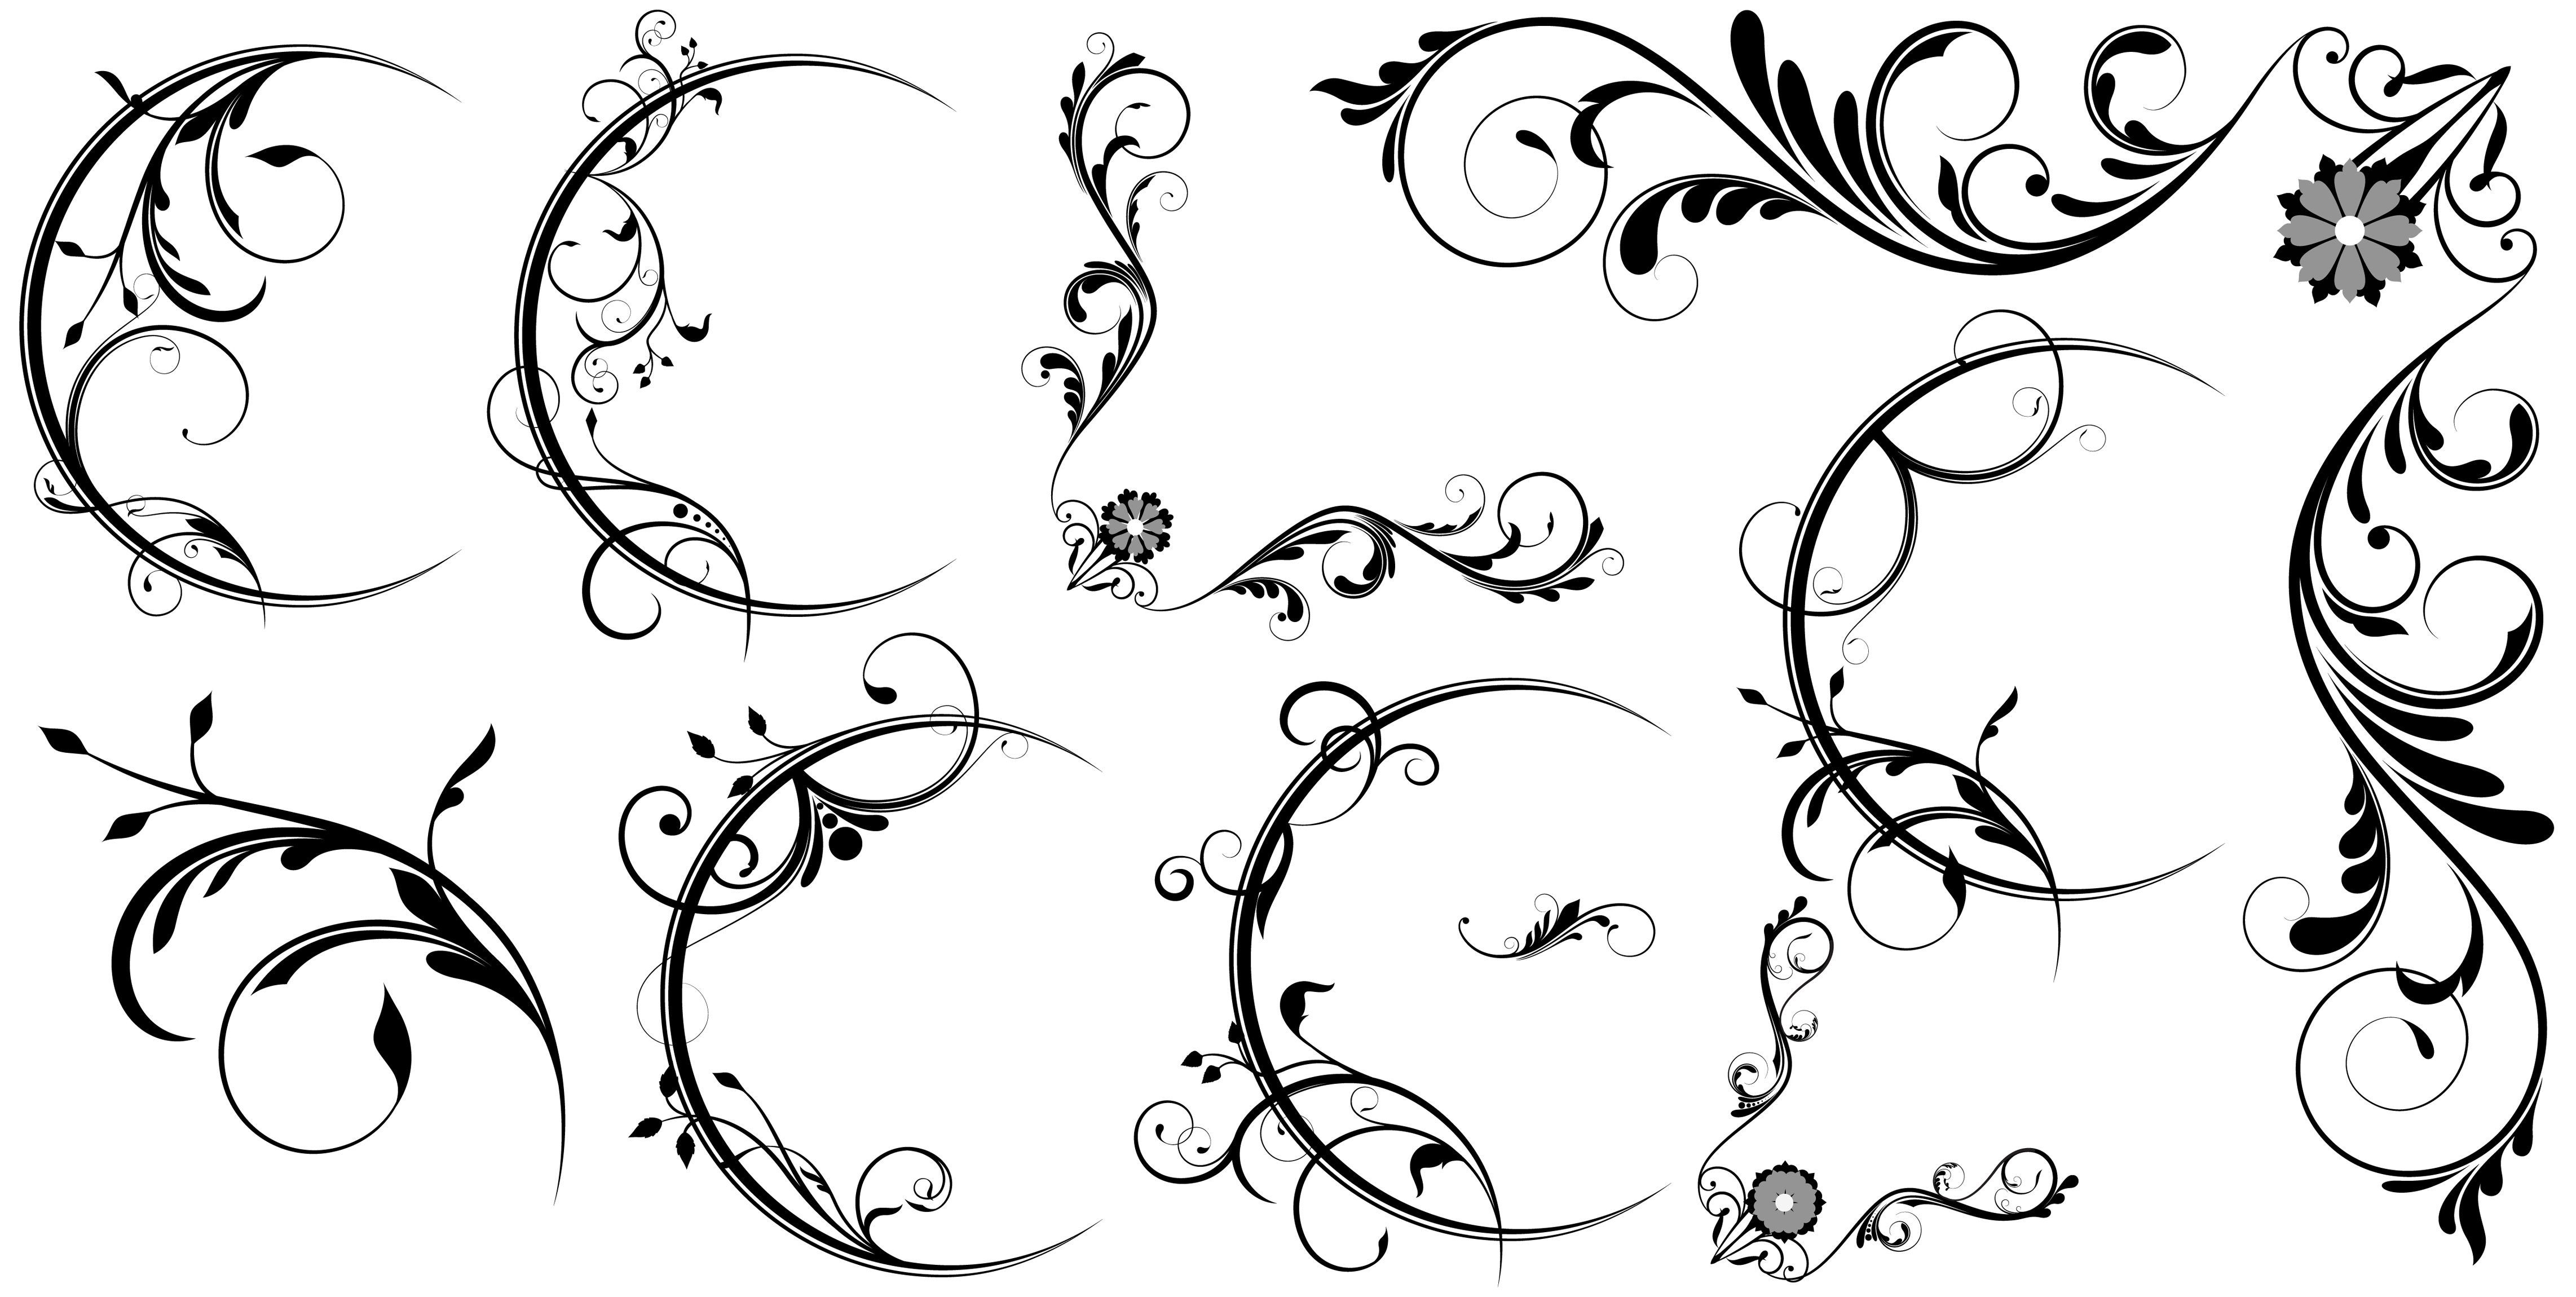 17 Free Photoshop Vector Graphics Images